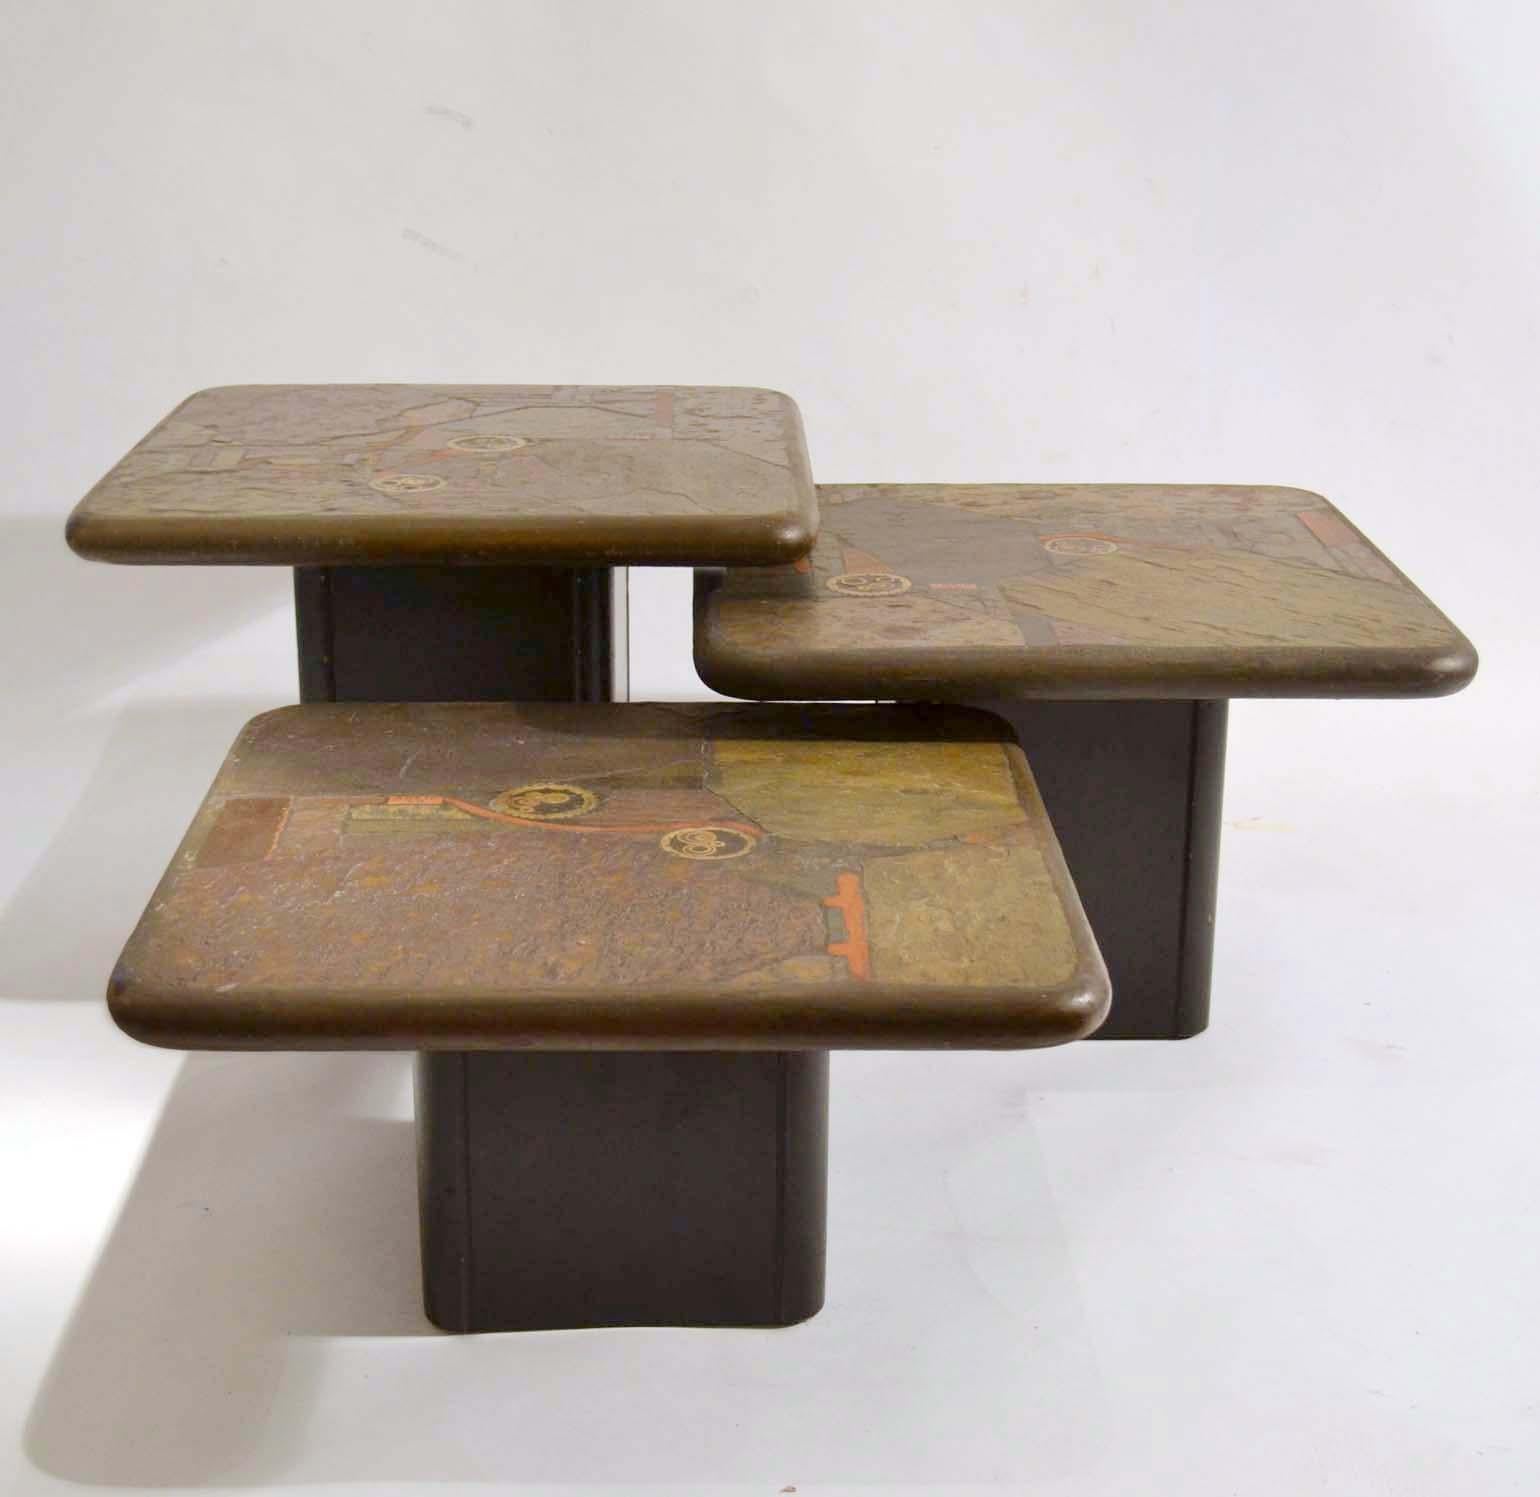 Hand-Crafted Brutalist Mosaic Coffee Tables by Paul Kingma, Kneip 1989 For Sale